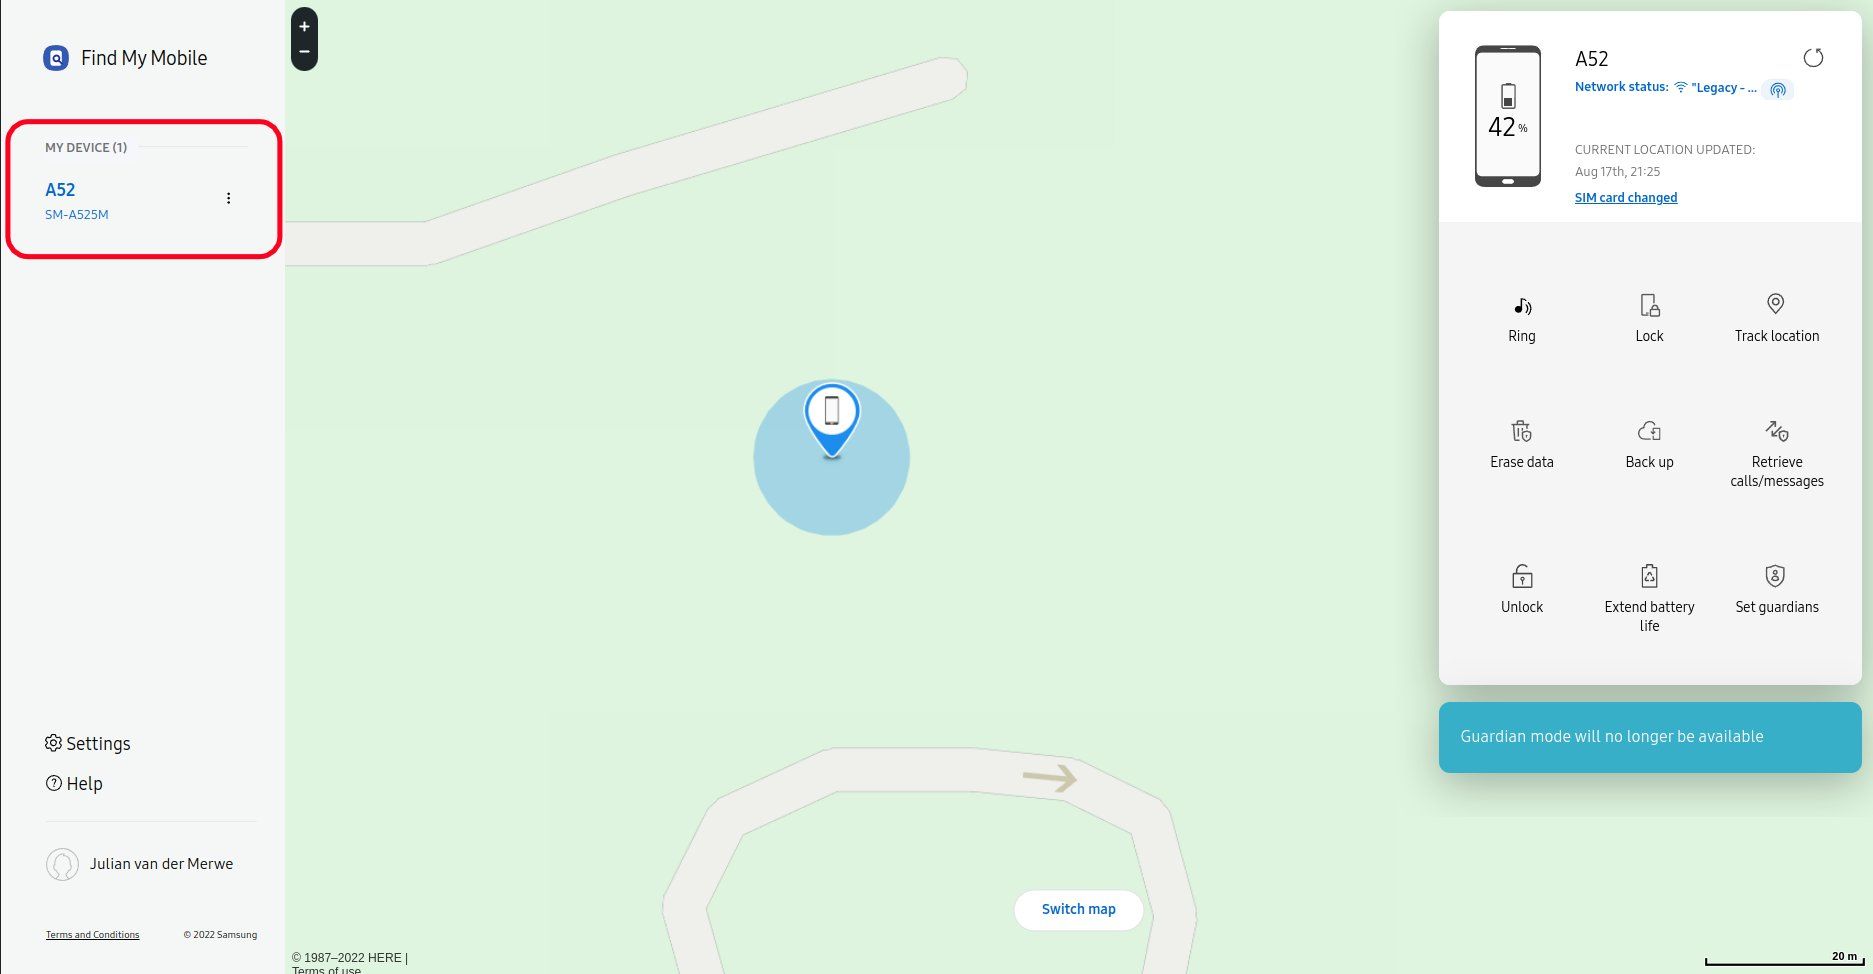 Samsung find my mobile main page open with the phone location in the center and menu options to either side of the map.